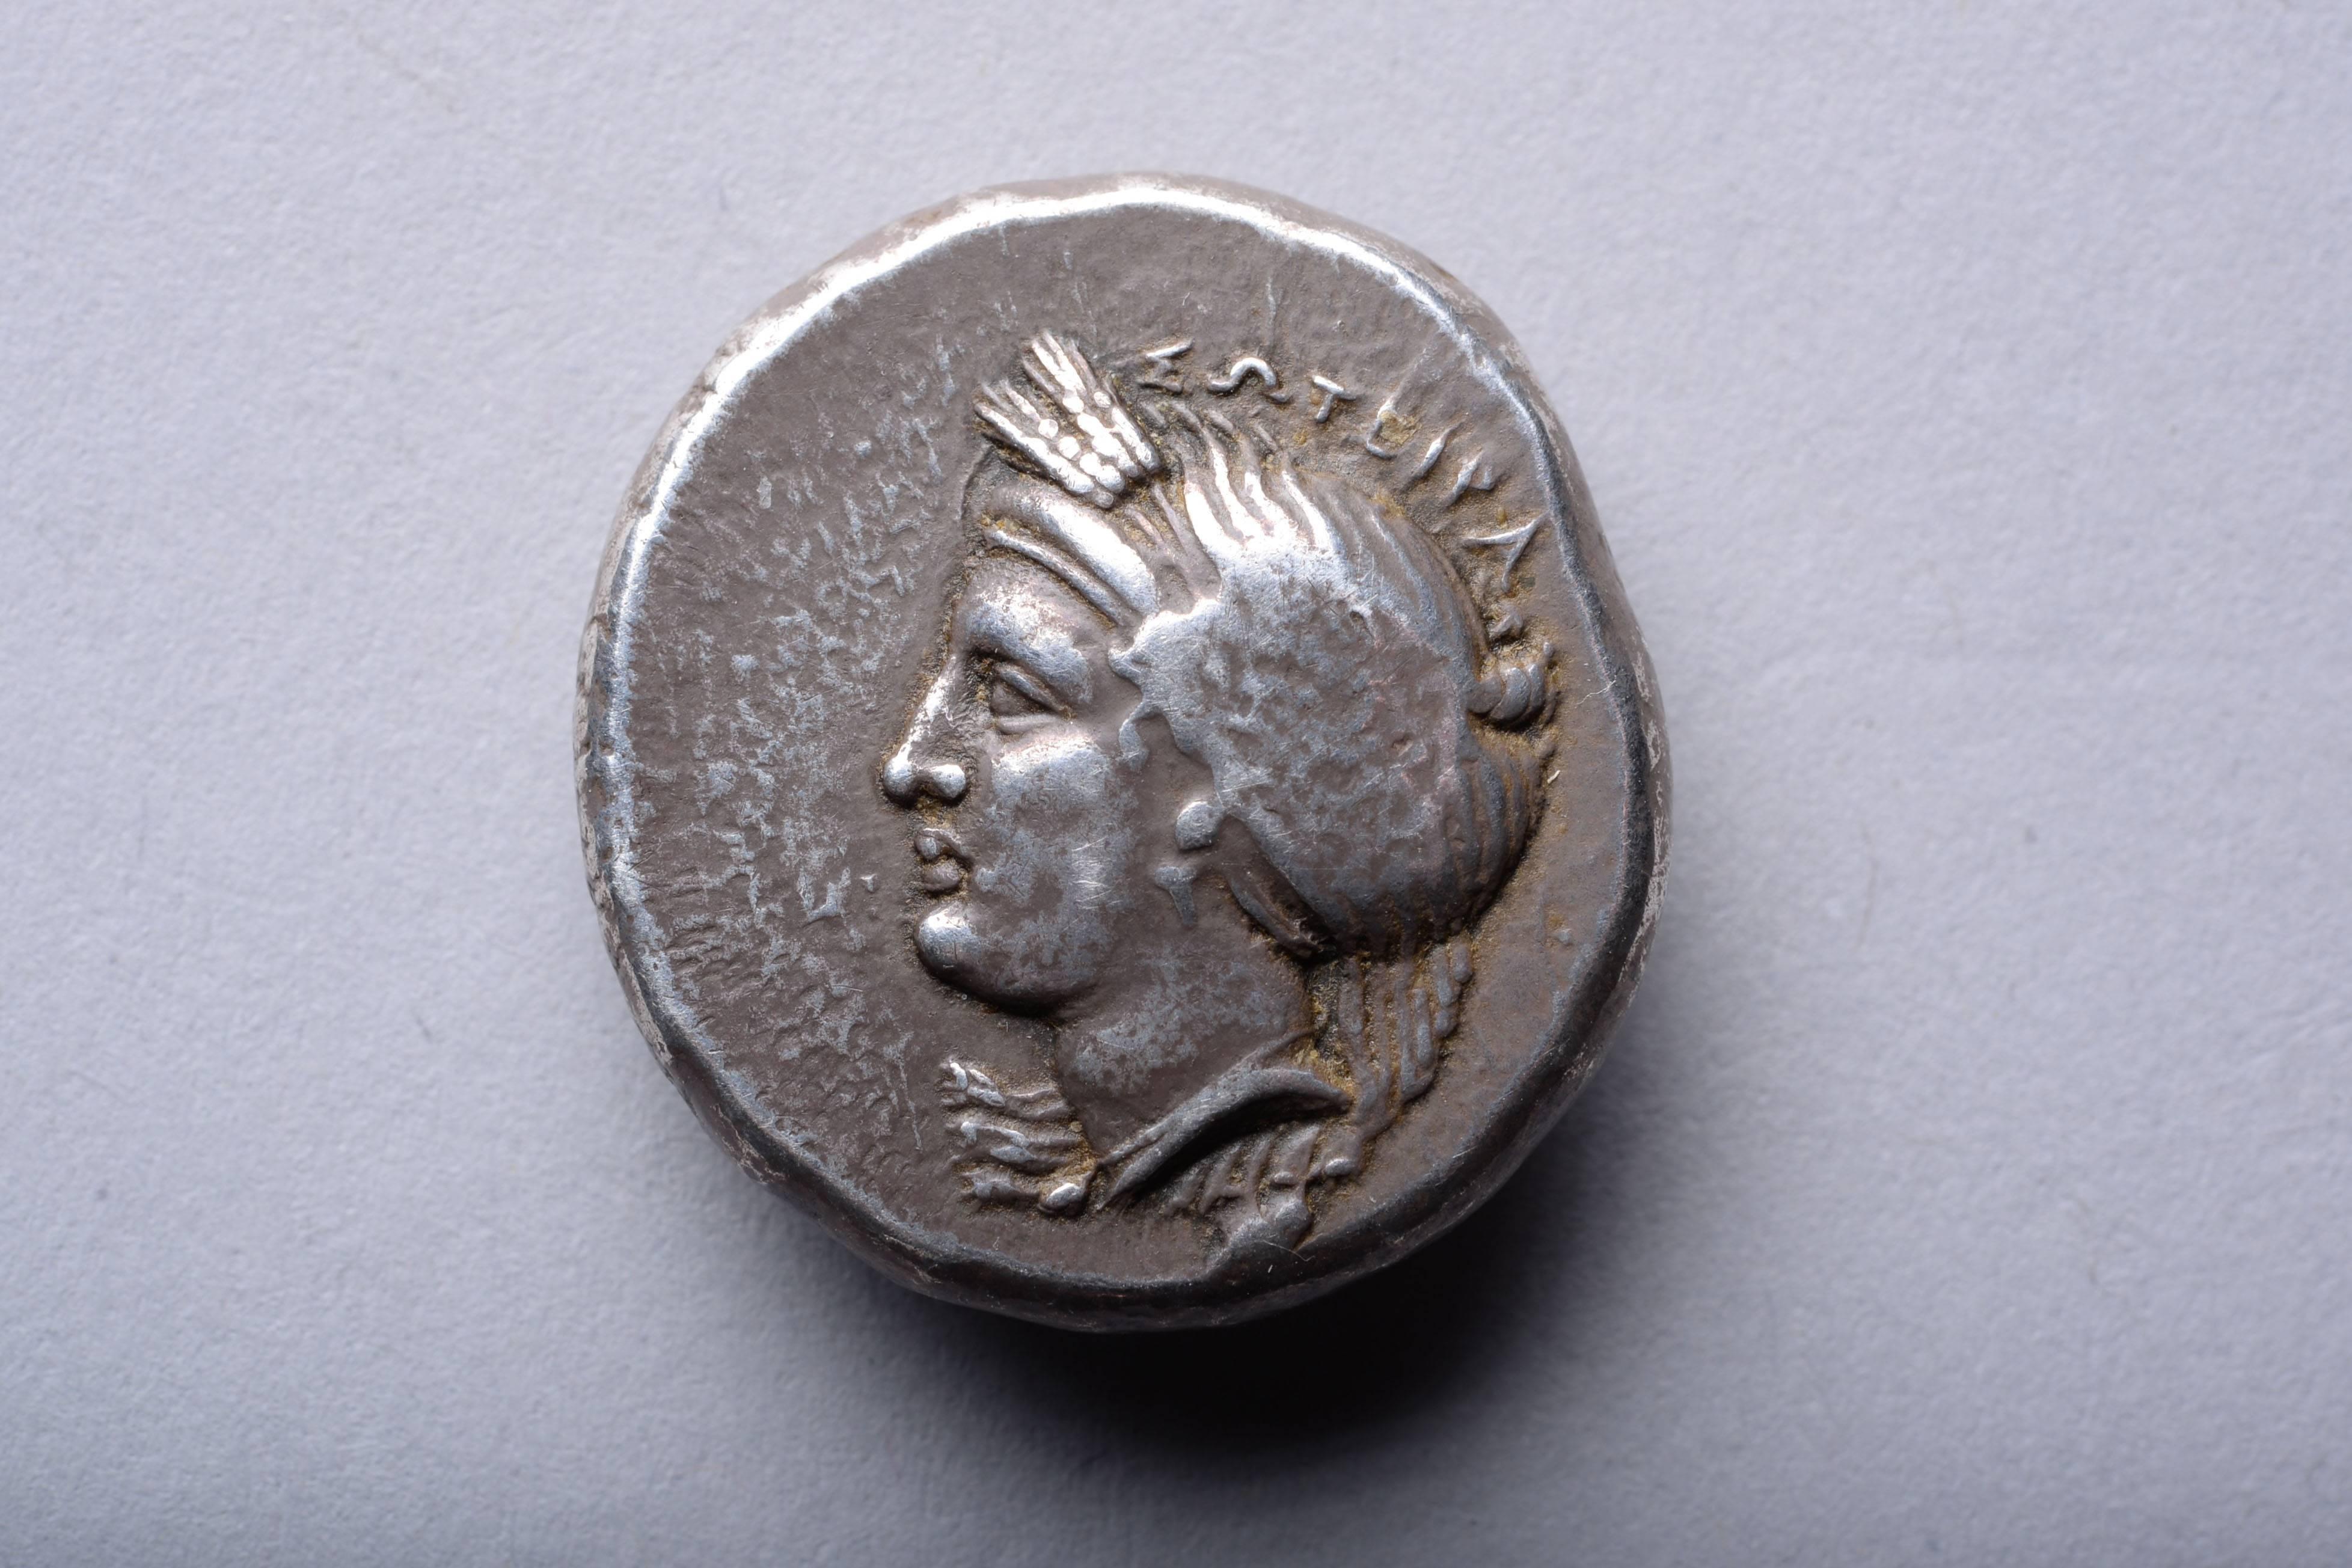 A silver tetradrachm from the city of Cyzicus, Mysia, modern-day western Turkey, circa 380-360 BC.

The obverse with the head of Kore-Soteira ('the Saviour Maiden'), her hair bound in a headband and wrapped in a wreath of barley ears. The